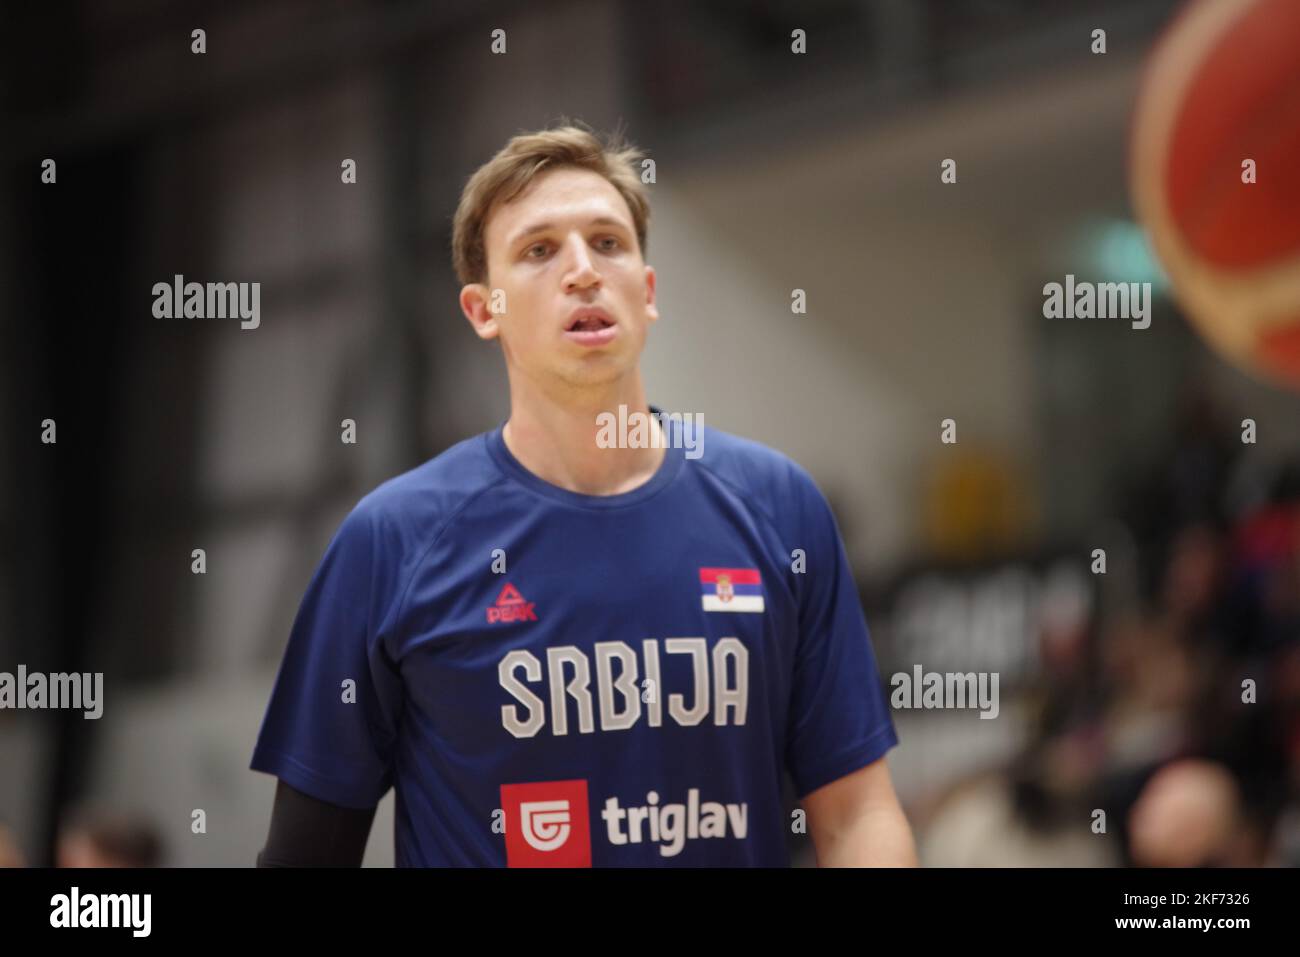 Newcastle upon Tyne, England, 11 November 2022. Aleksa Radanov warming up for Serbia against Great Britain in the FIBA Basketball World Cup 2023 Qualifiers at the Vertu Motors Arena. Credit: Colin Edwards Stock Photo